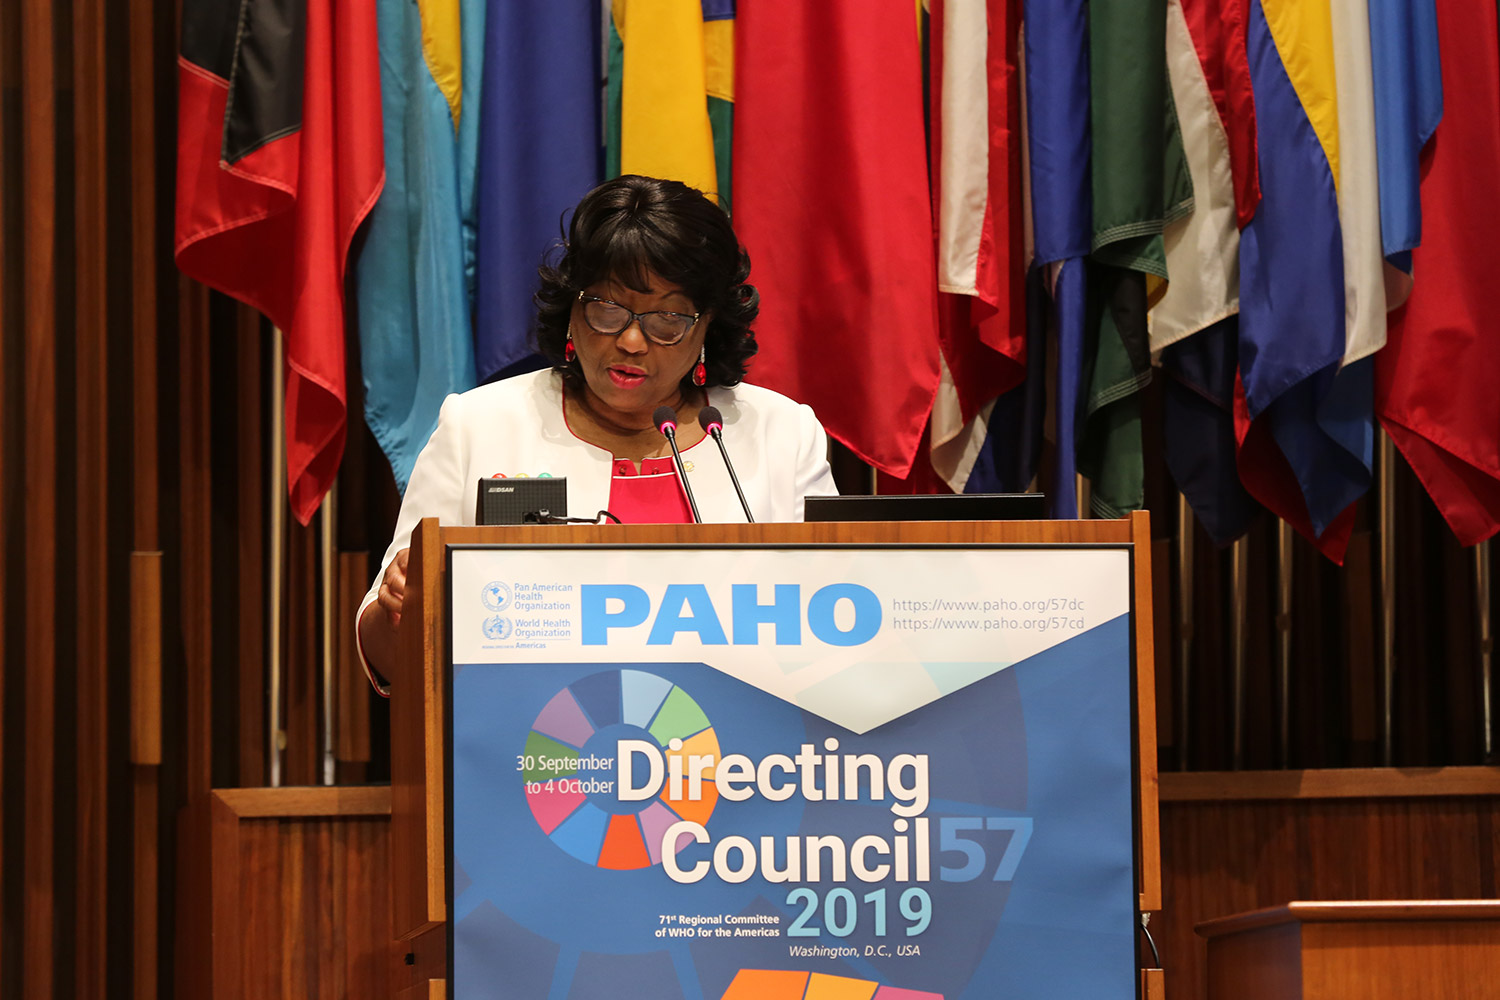 Dr. Carissa F. Etienne present Annual Report of the Director 2019